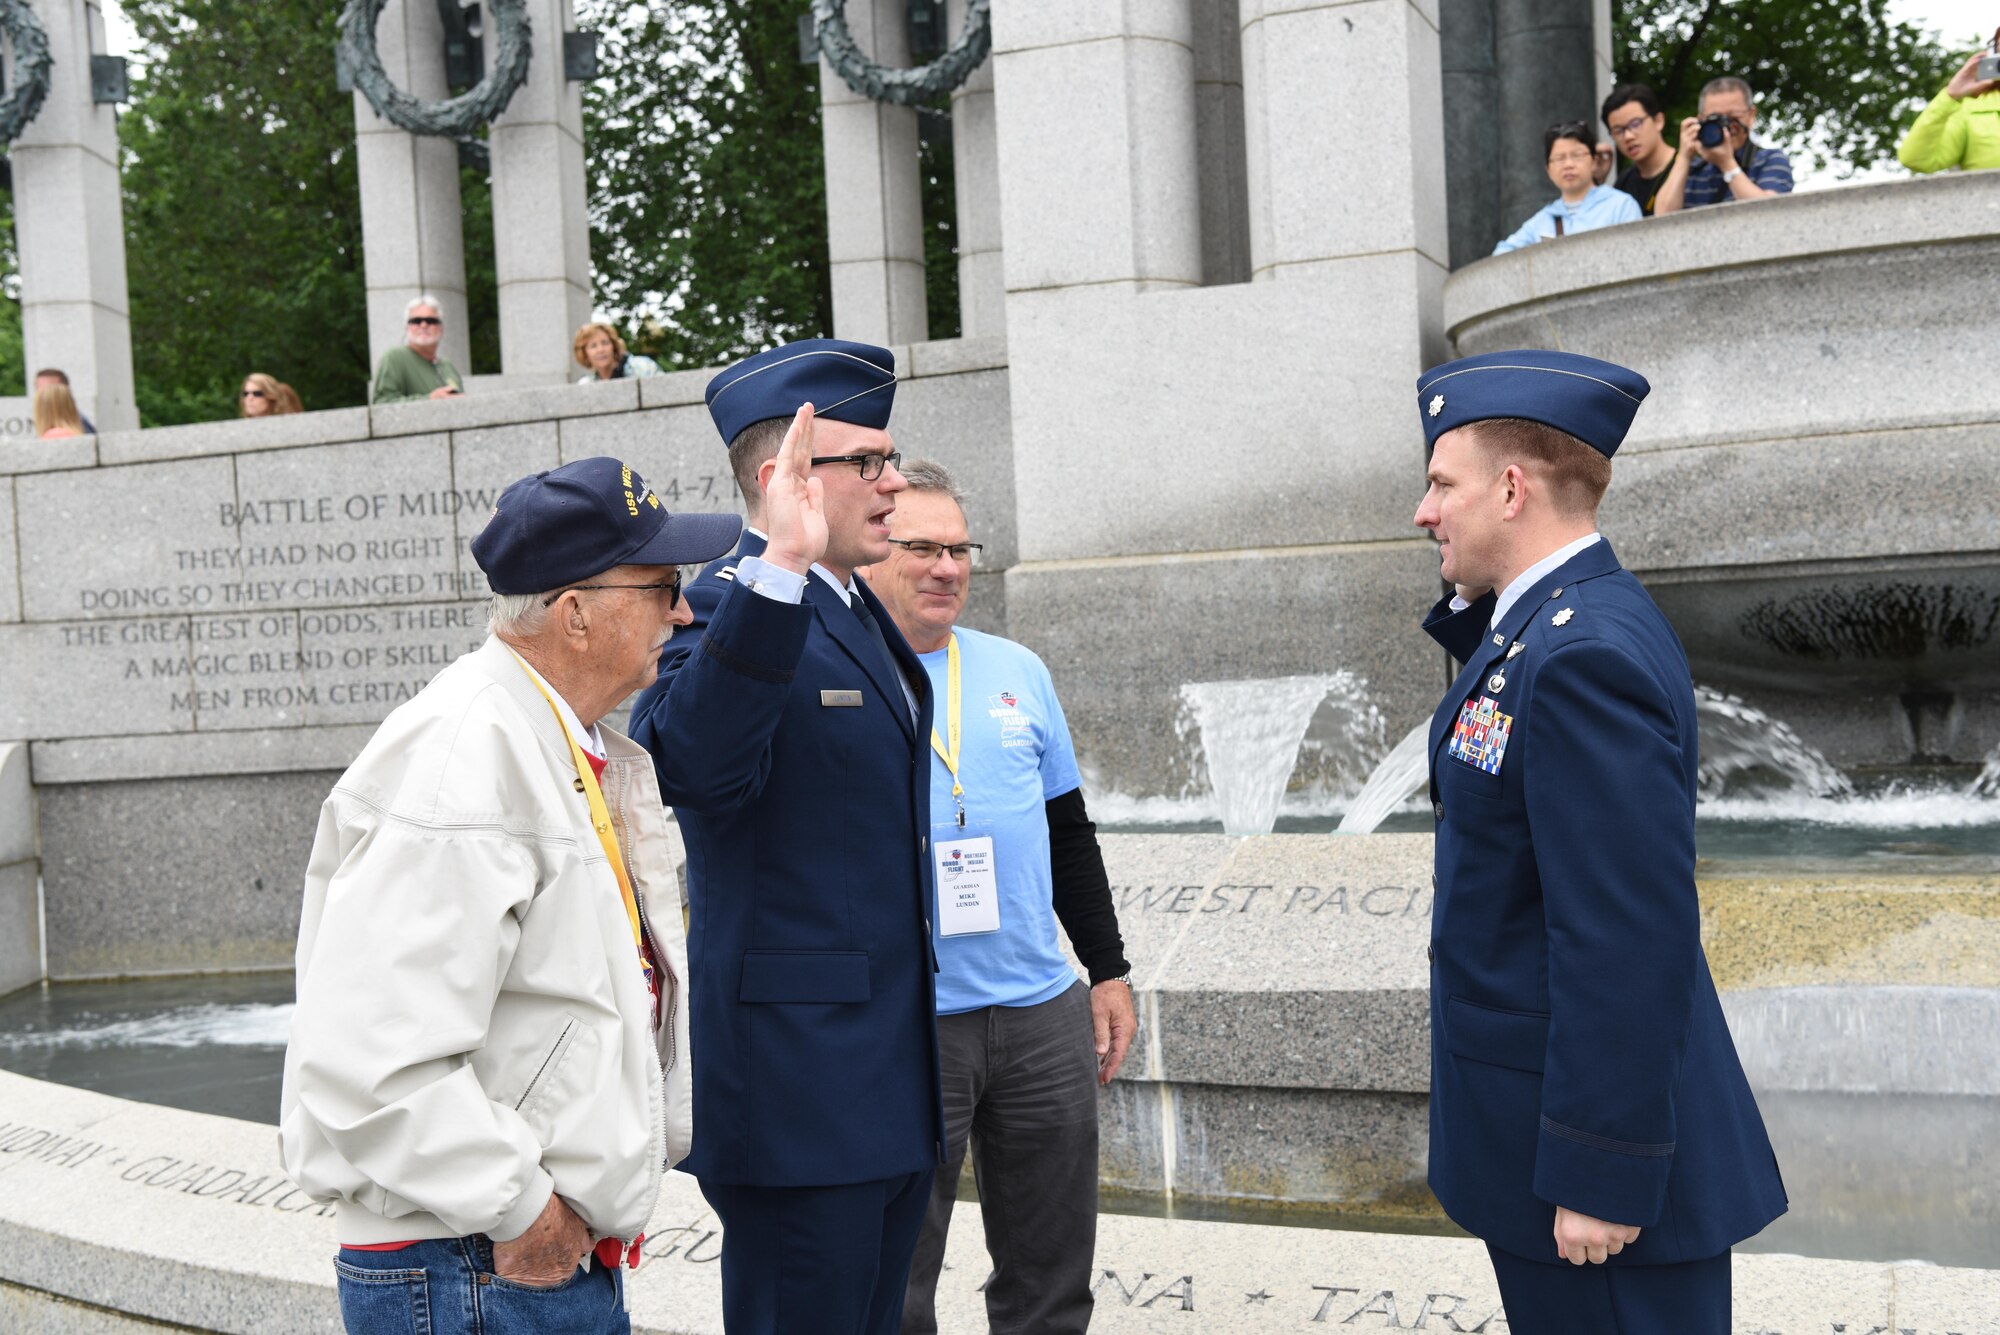 First Lt. Nicholas Lundin, 480th Intelligence, Reconnaissance and Surveillance Wing chief of current operations, stands between his dad Michael Lundin and grandfather Ray Lundin while saying the oath of enlistment administered by Lt. Col. Brian Webster, presiding officer, May 24, 2017 at the World War II memorial in Washington D.C. Underneath the Pacific portion of the World War II monument, 1st Lt. Nicholas Lundin’s new rank was pinned on by his father and grandfather. (U.S. Air Force photo by Tech. Sgt. Darnell T. Cannady)